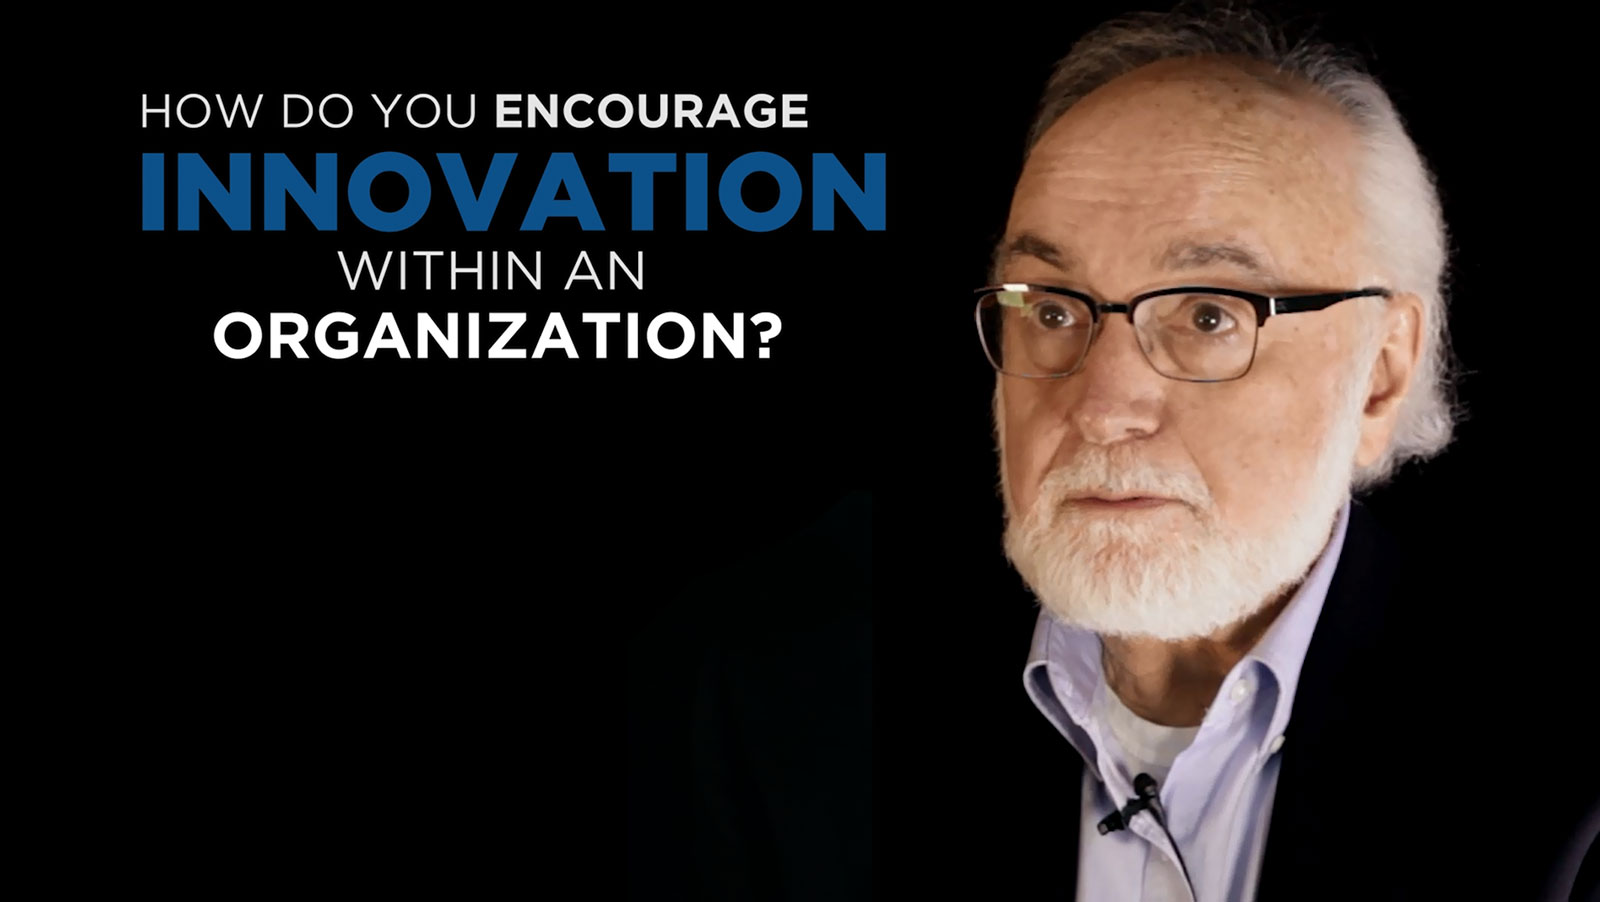 Shared Experience - How do you encourage innovation within an organization?